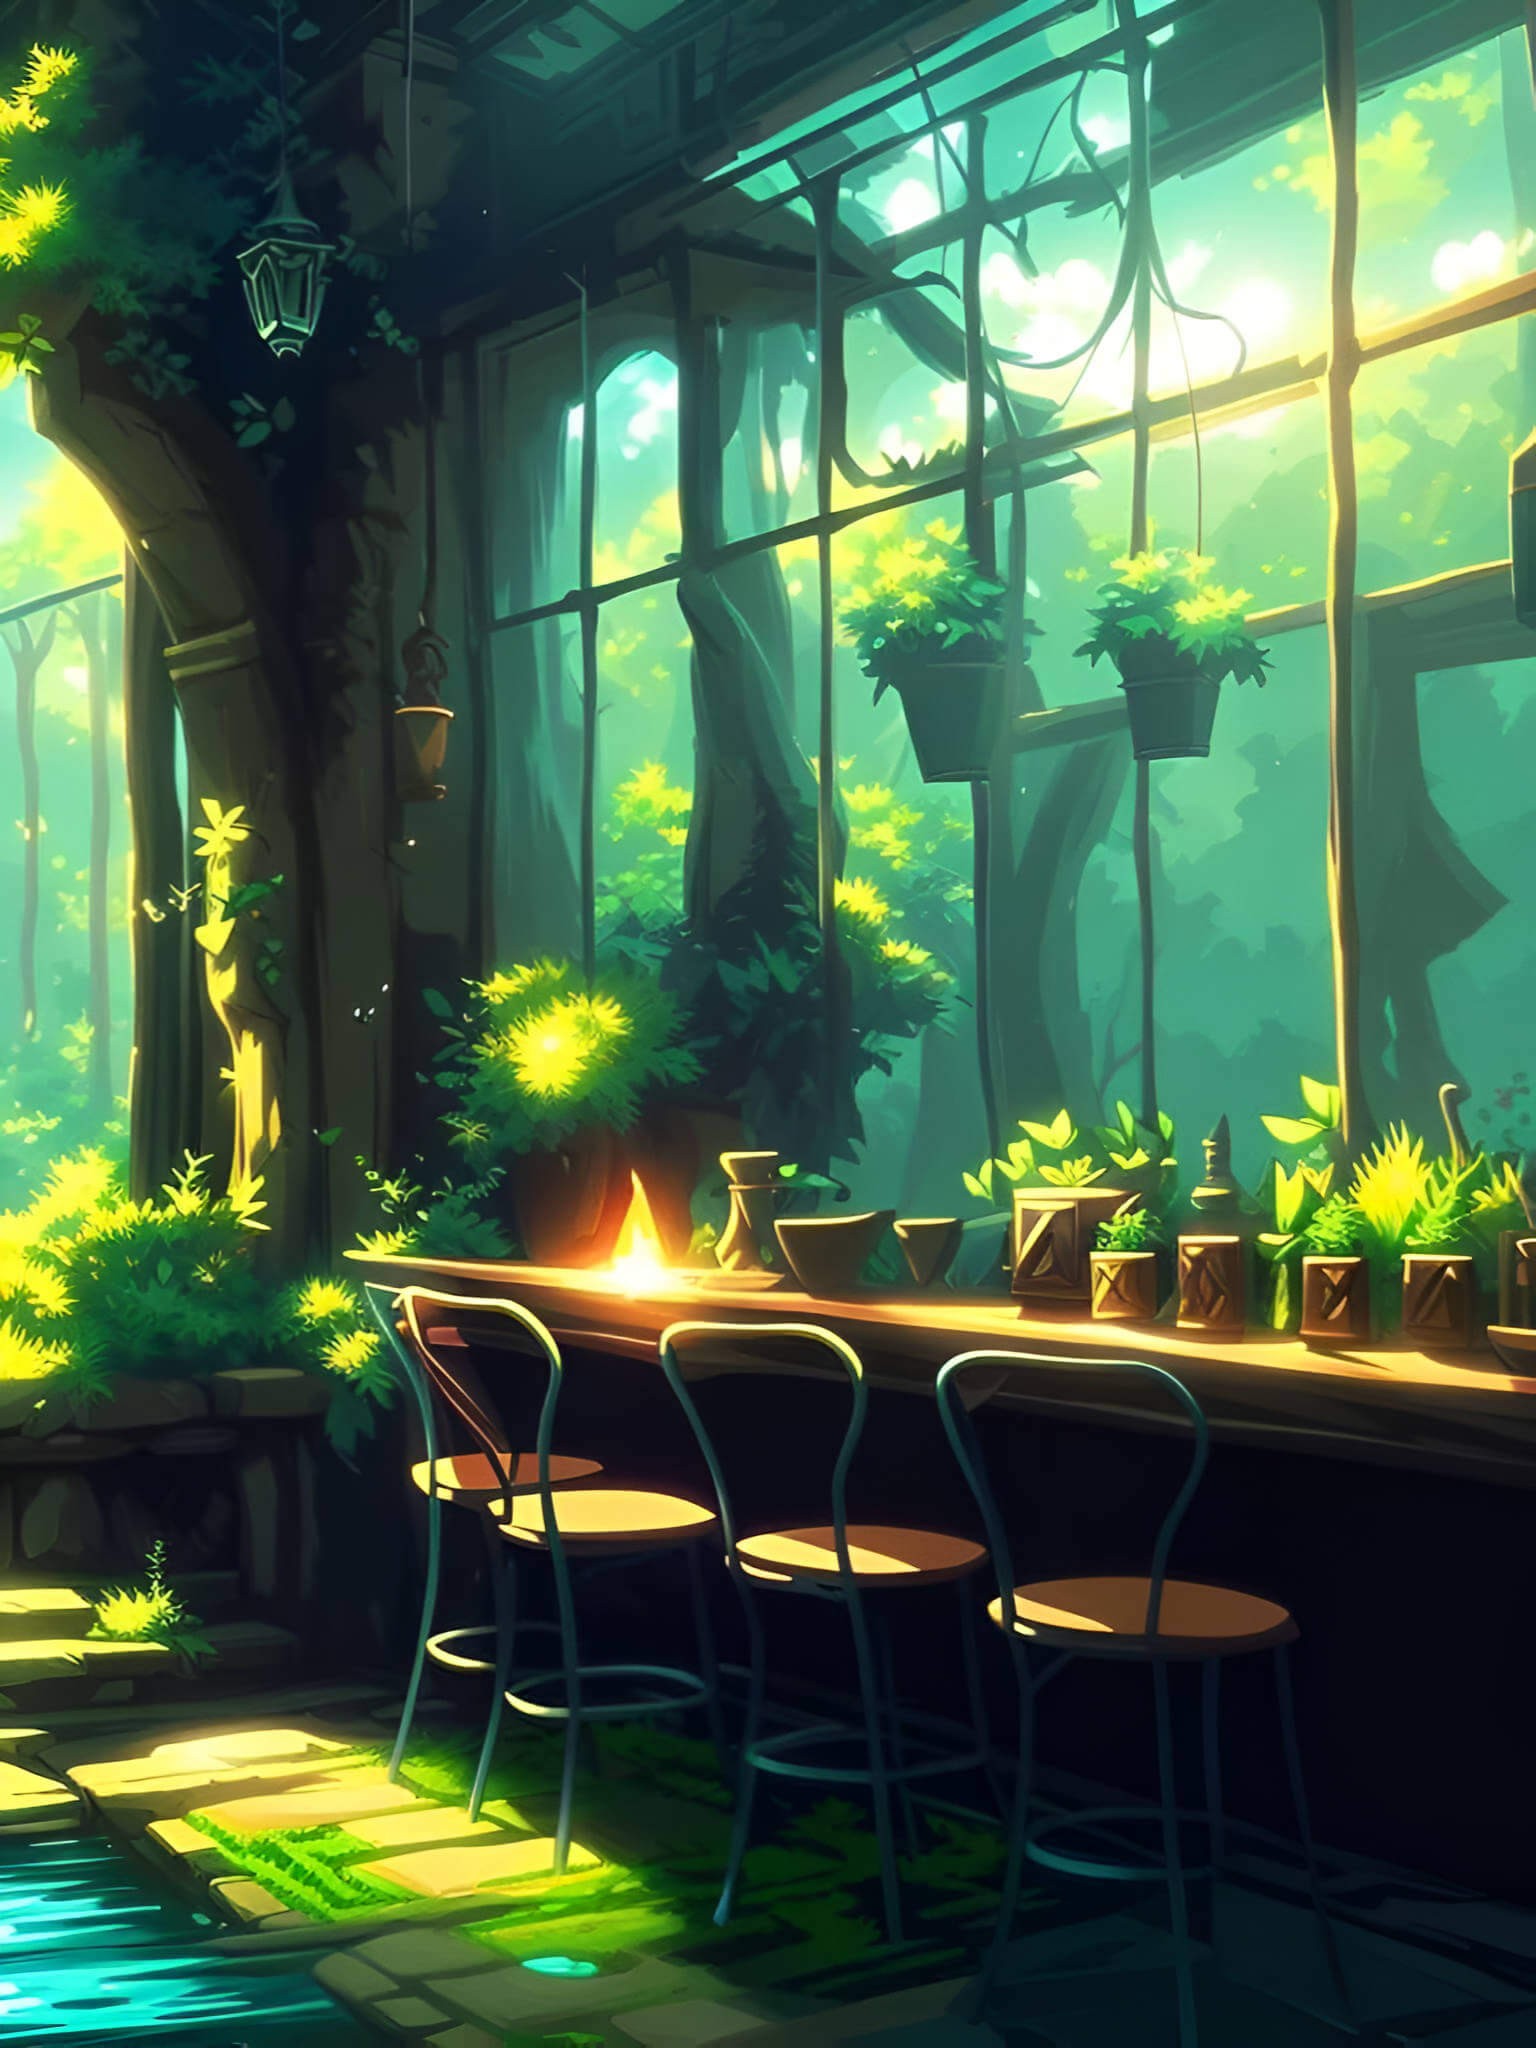 An AI-generated image illustrating a dreamy and artistic view of an eatery and bar with a fantastical ambiance.